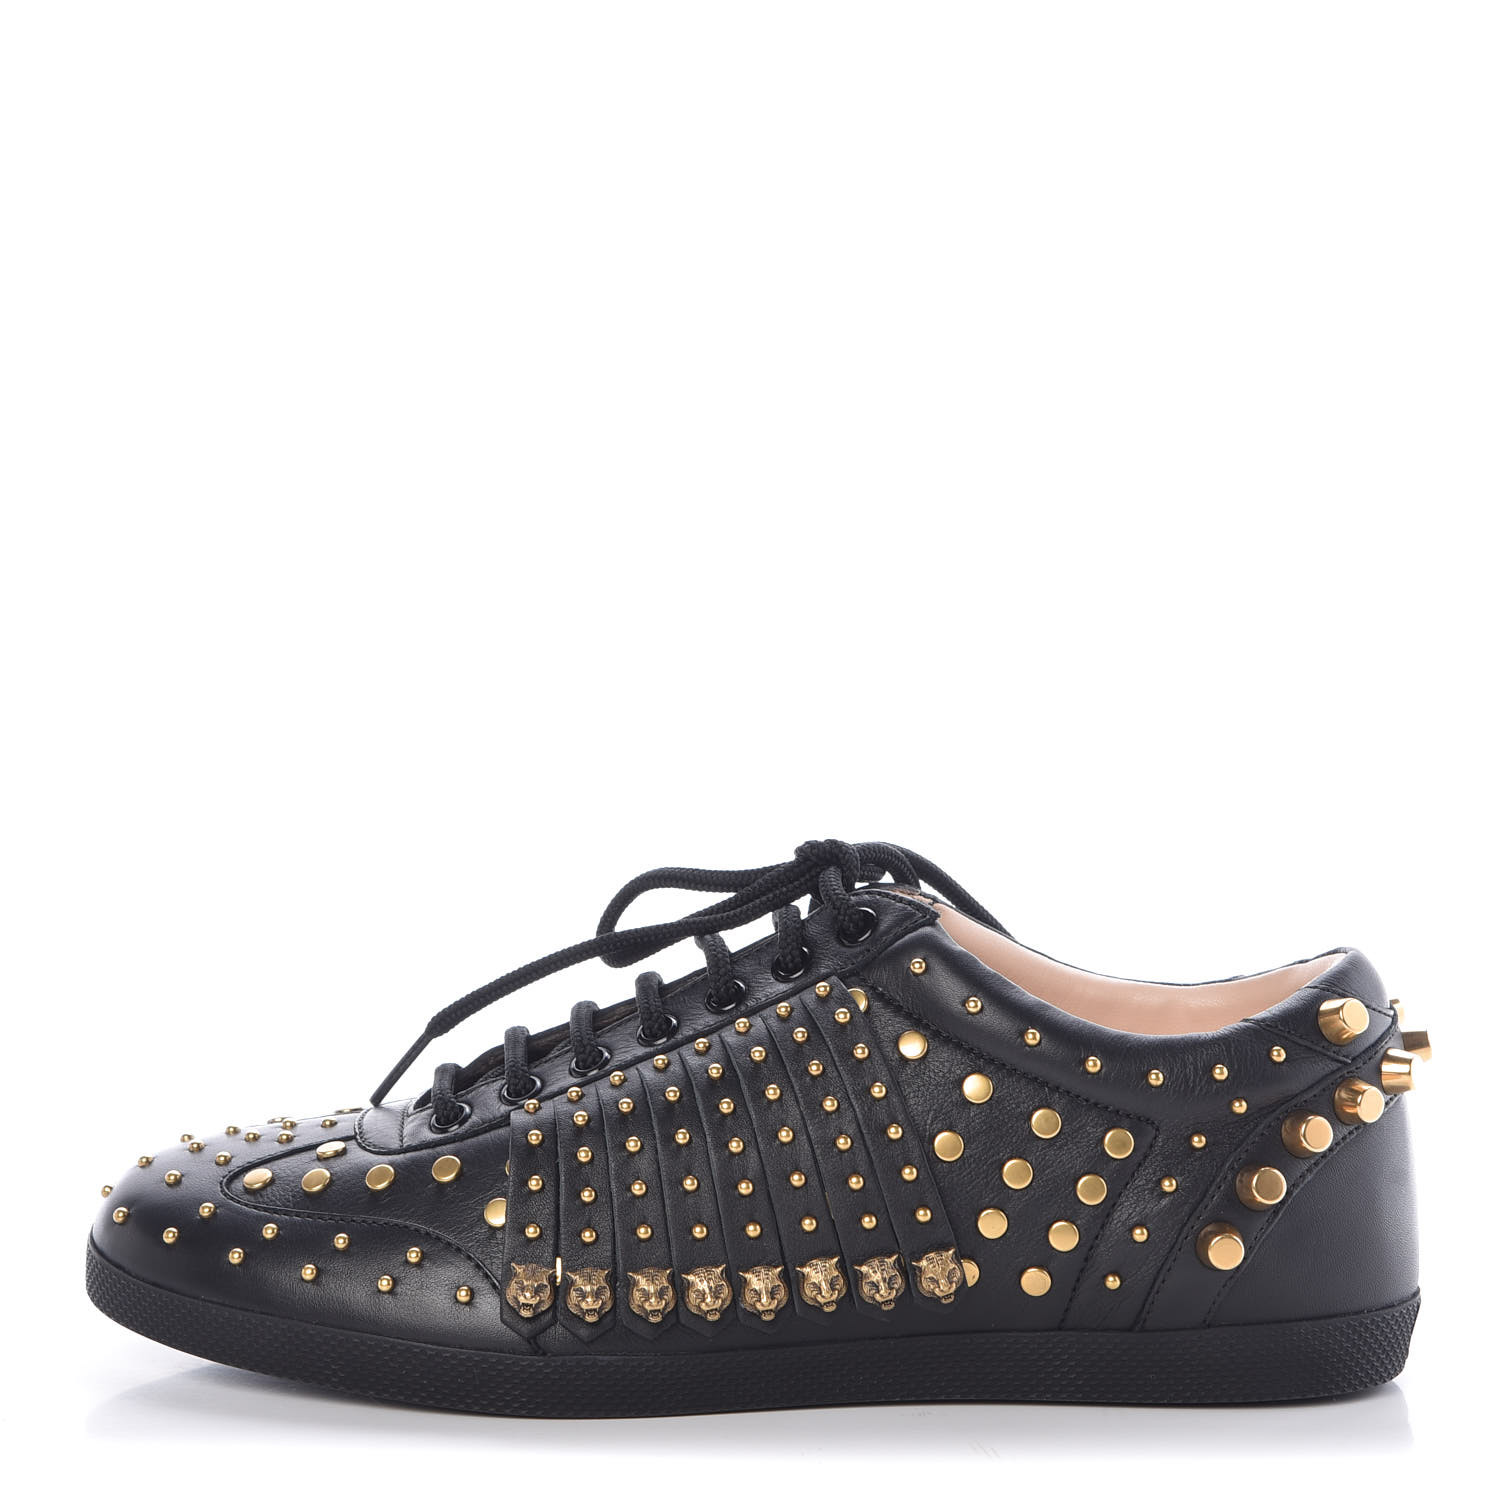 mens gucci shoes with studs